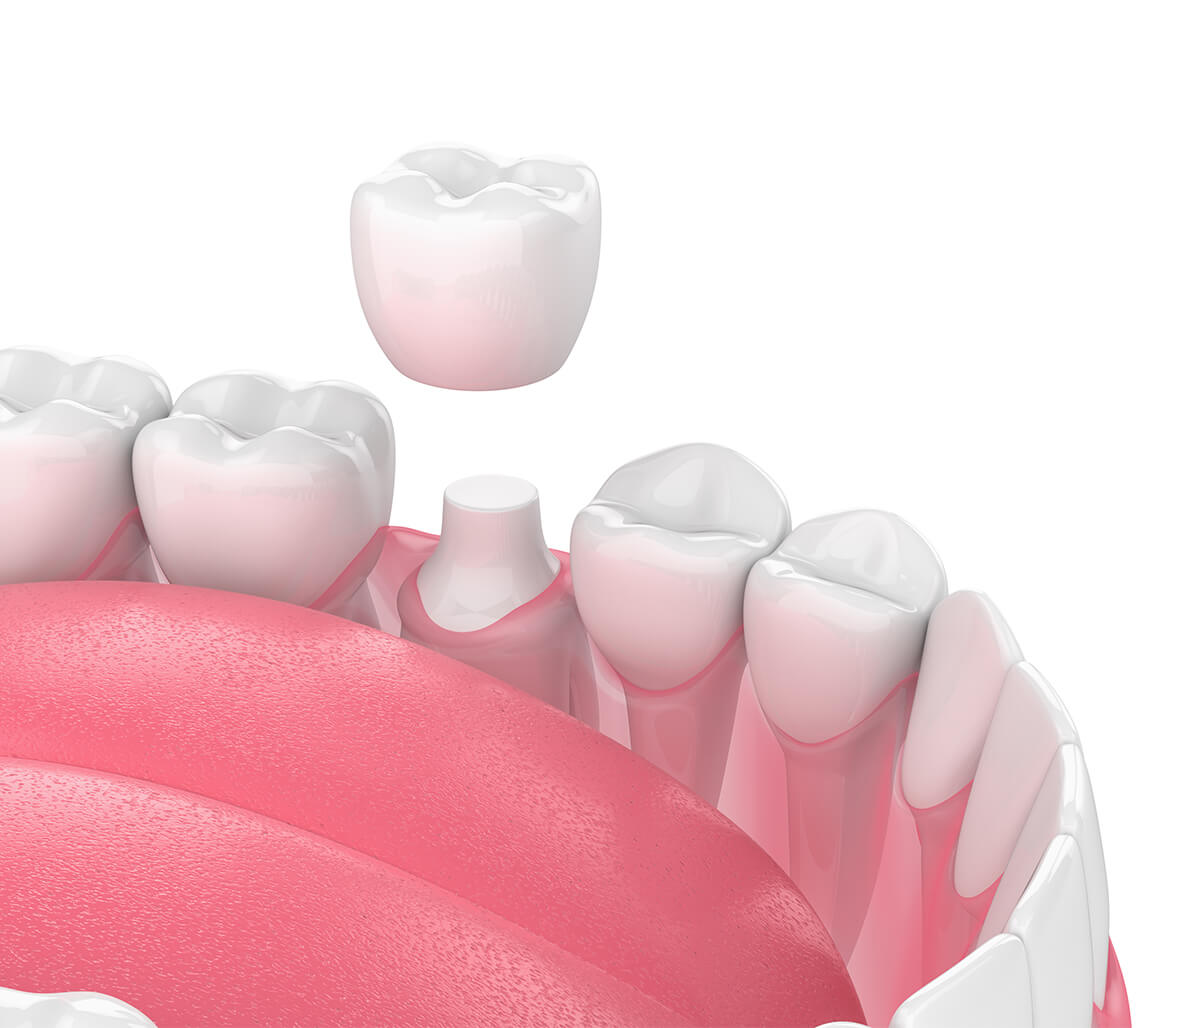 Dental Crowns for Cracked Teeth in Rochester MI Area